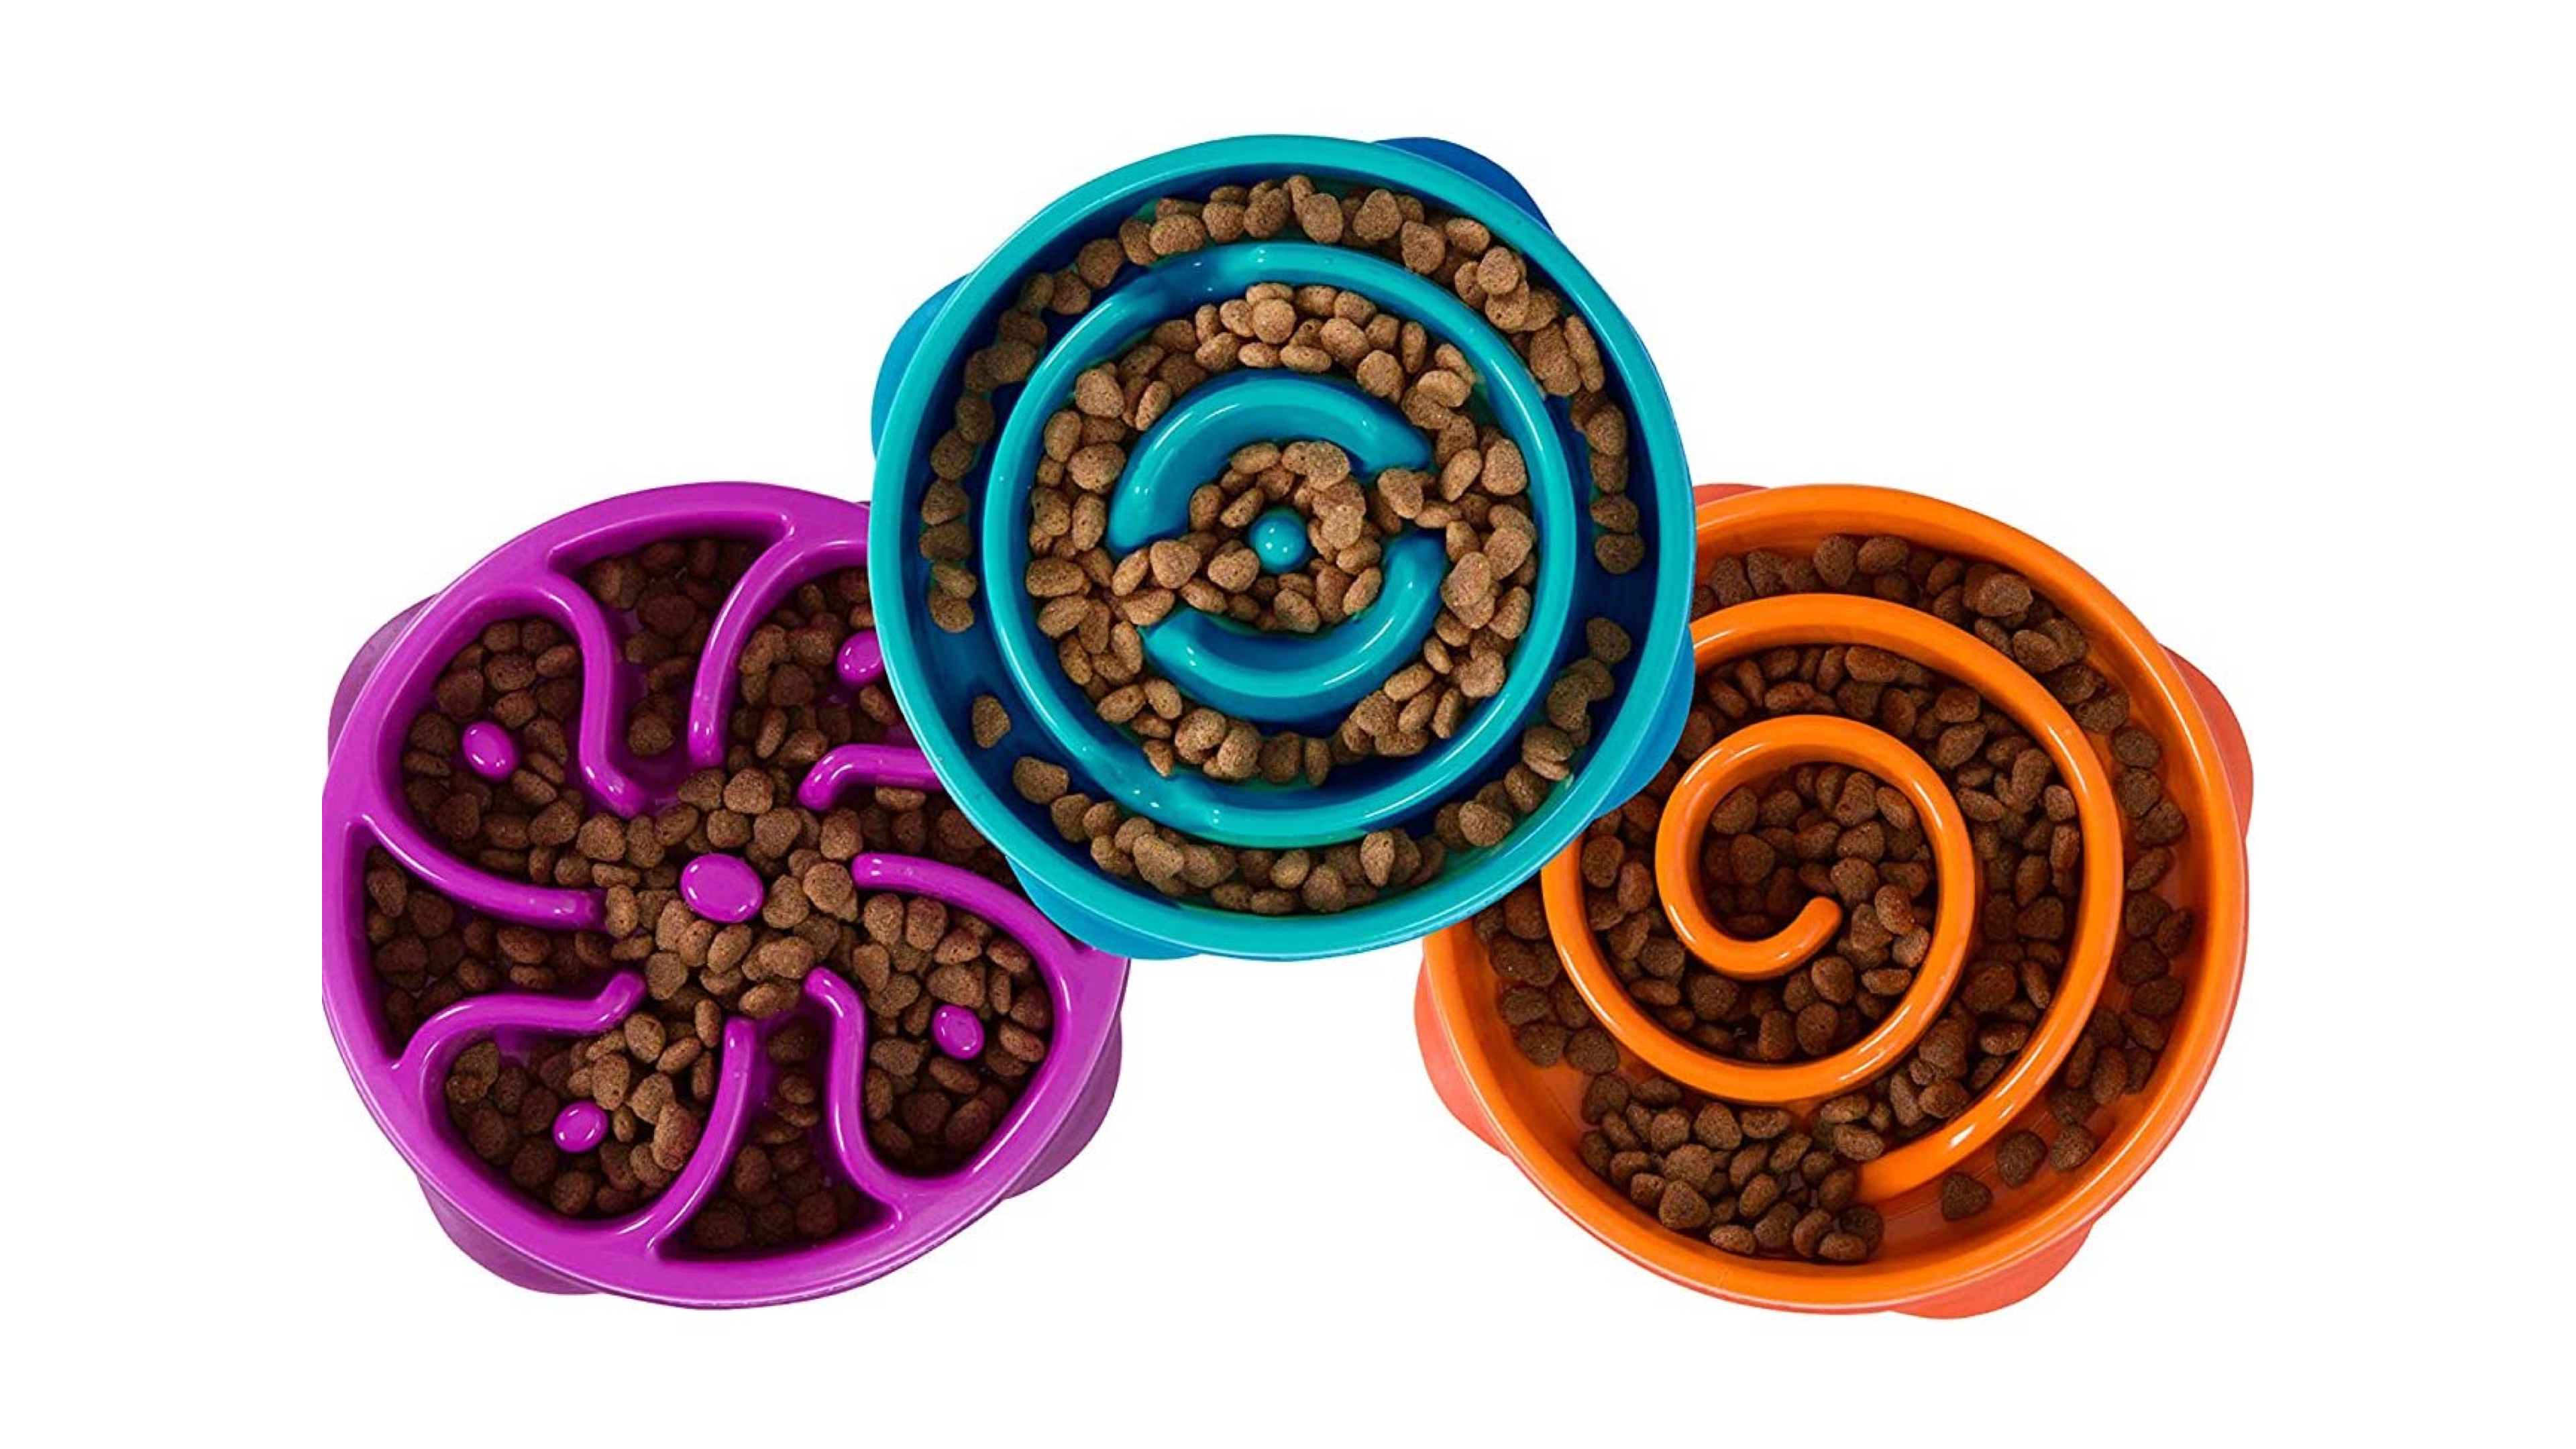 slow-feeding food bowl for pets with grooves to help them eat slower